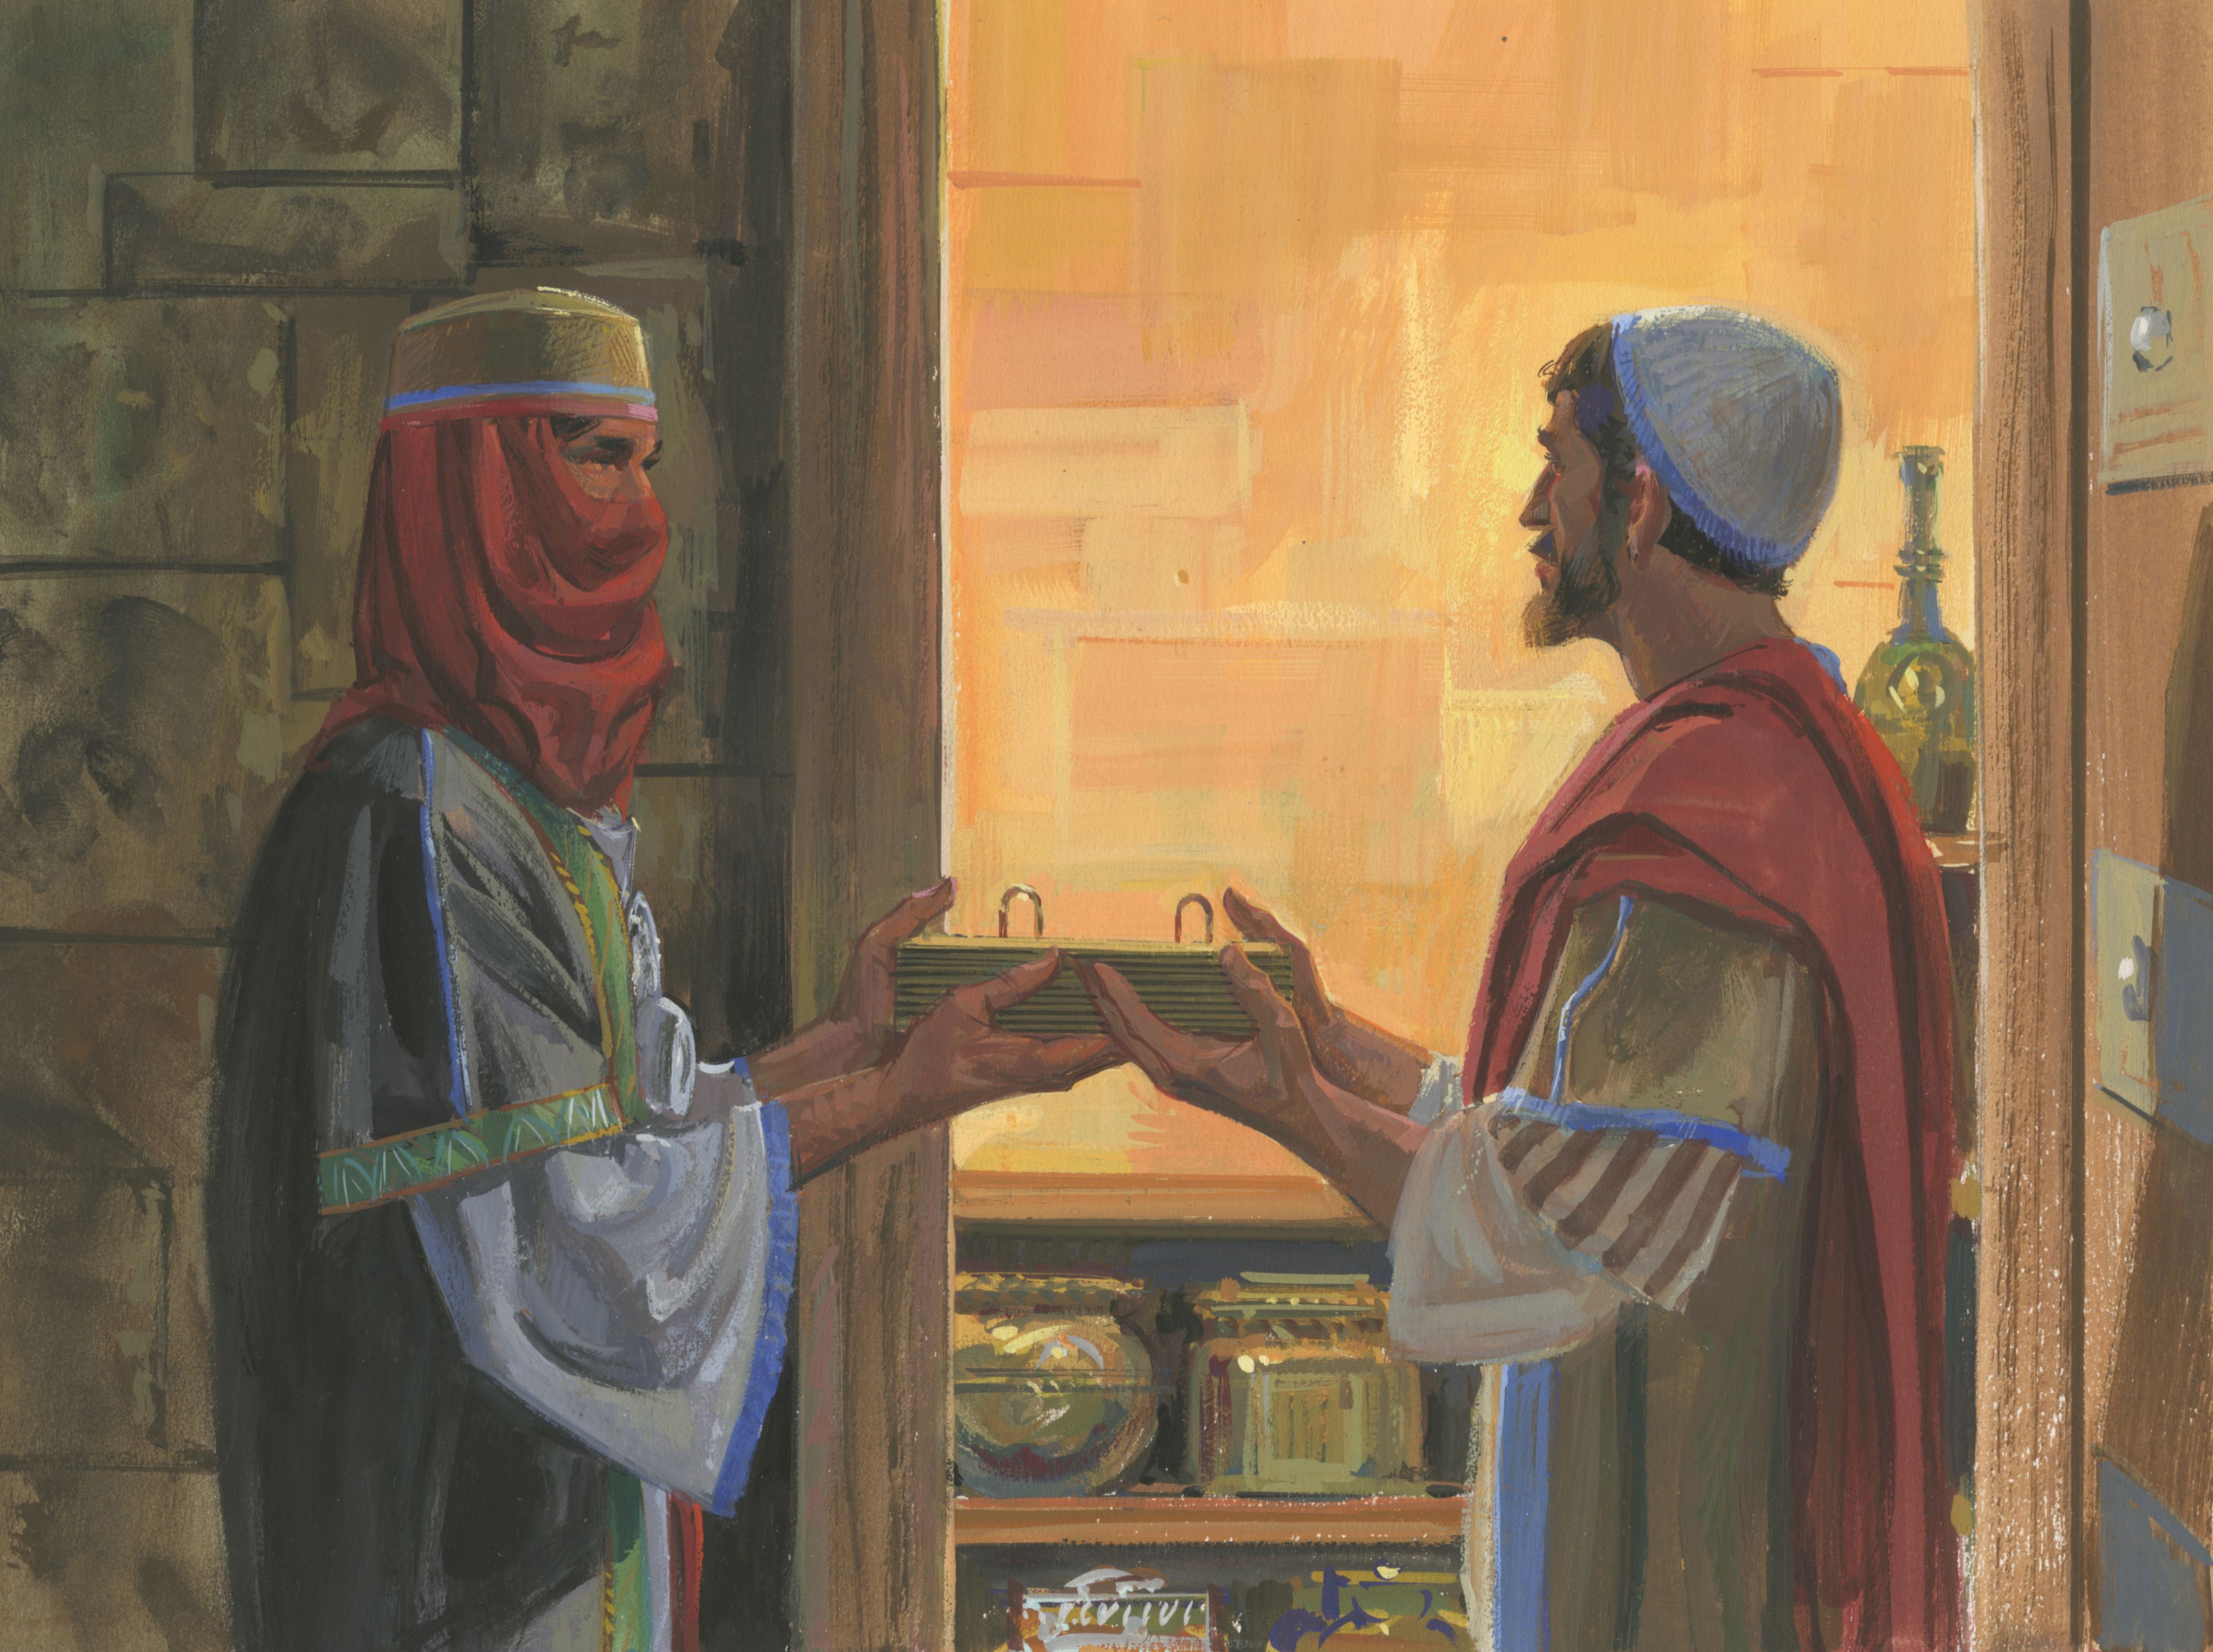 A painting by Jerry Thompson depicting Nephi and Zoram talking; Primary manual 3-43